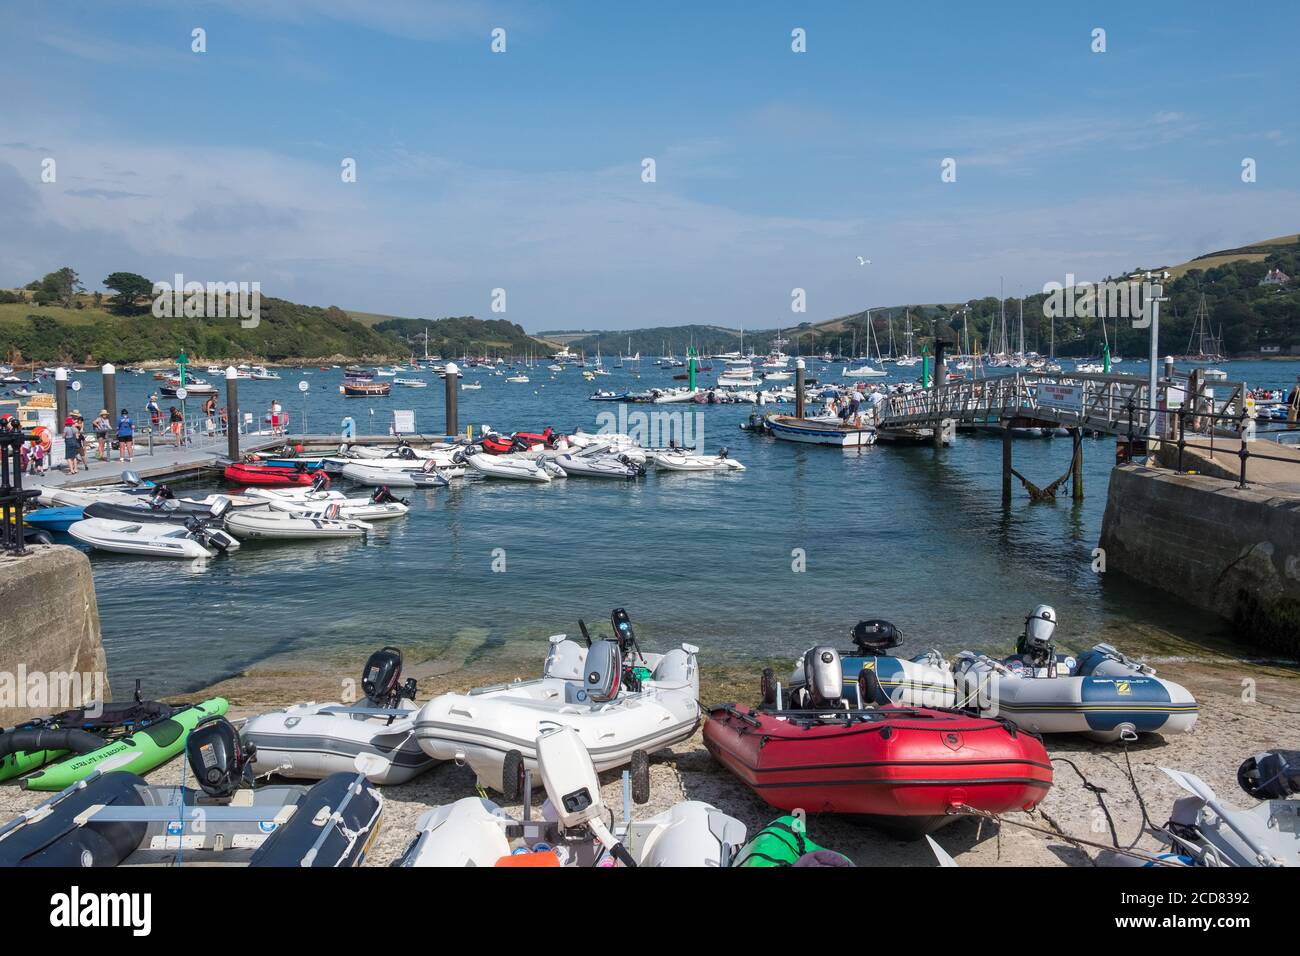 Inflatable dinghies on the slipway at Whitestrand pontoon in Salcombe, South Hams, Devon Stock Photo